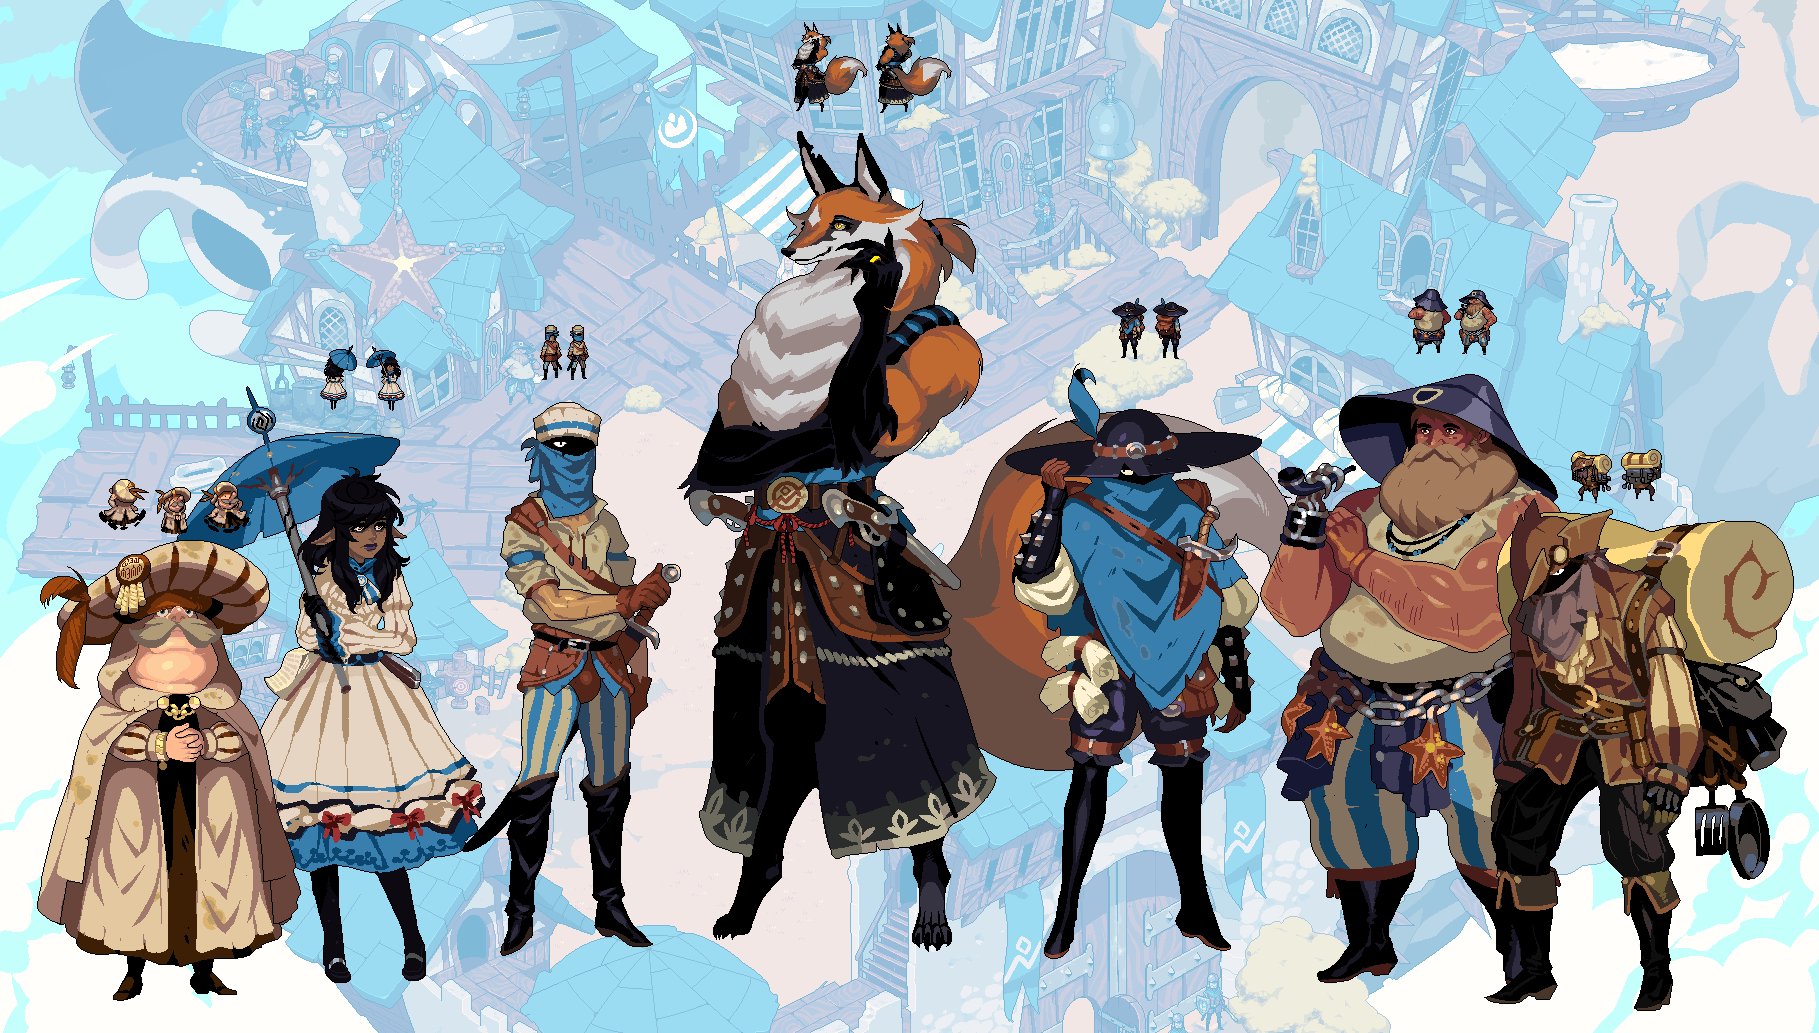 of Cloud Meadow!
Here are some of the NPCs you can meet in our rece...